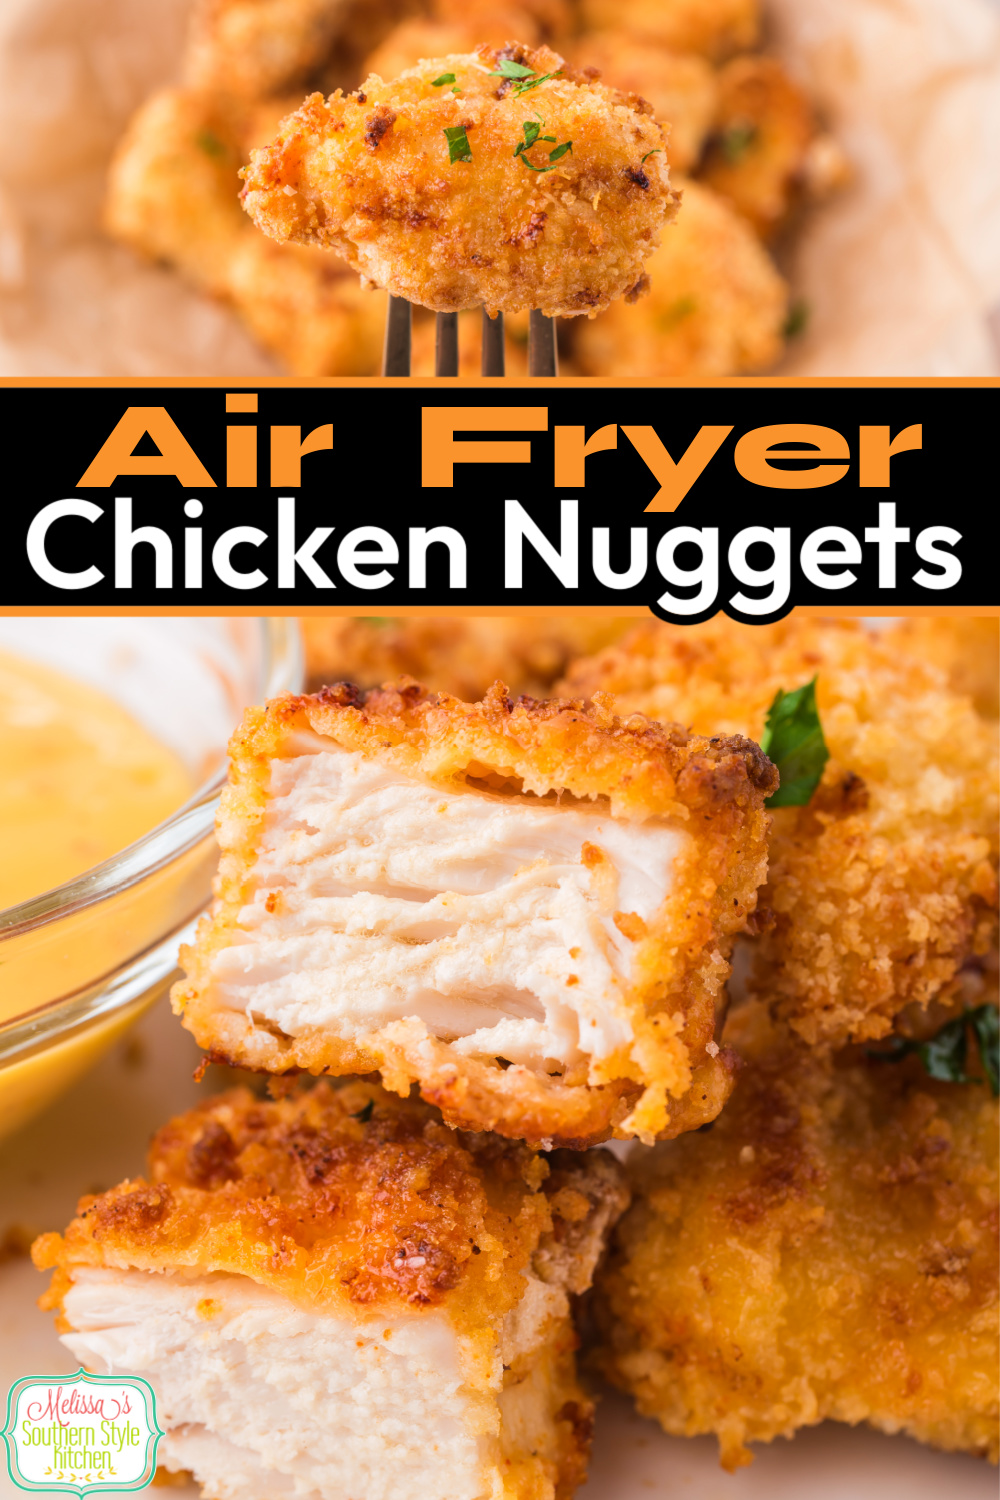 Serve these crispy Air Fryer Chicken Nuggets as an entree or with toothpicks as an appetizer alongside your favorite sauces for dipping. #chickennuggets #airfryerrecipes #airfryerchicken #airfryerchickennuggets #easychickenrecipes #chickenbreasts #southernfriedchicken #southernstyle via @melissasssk